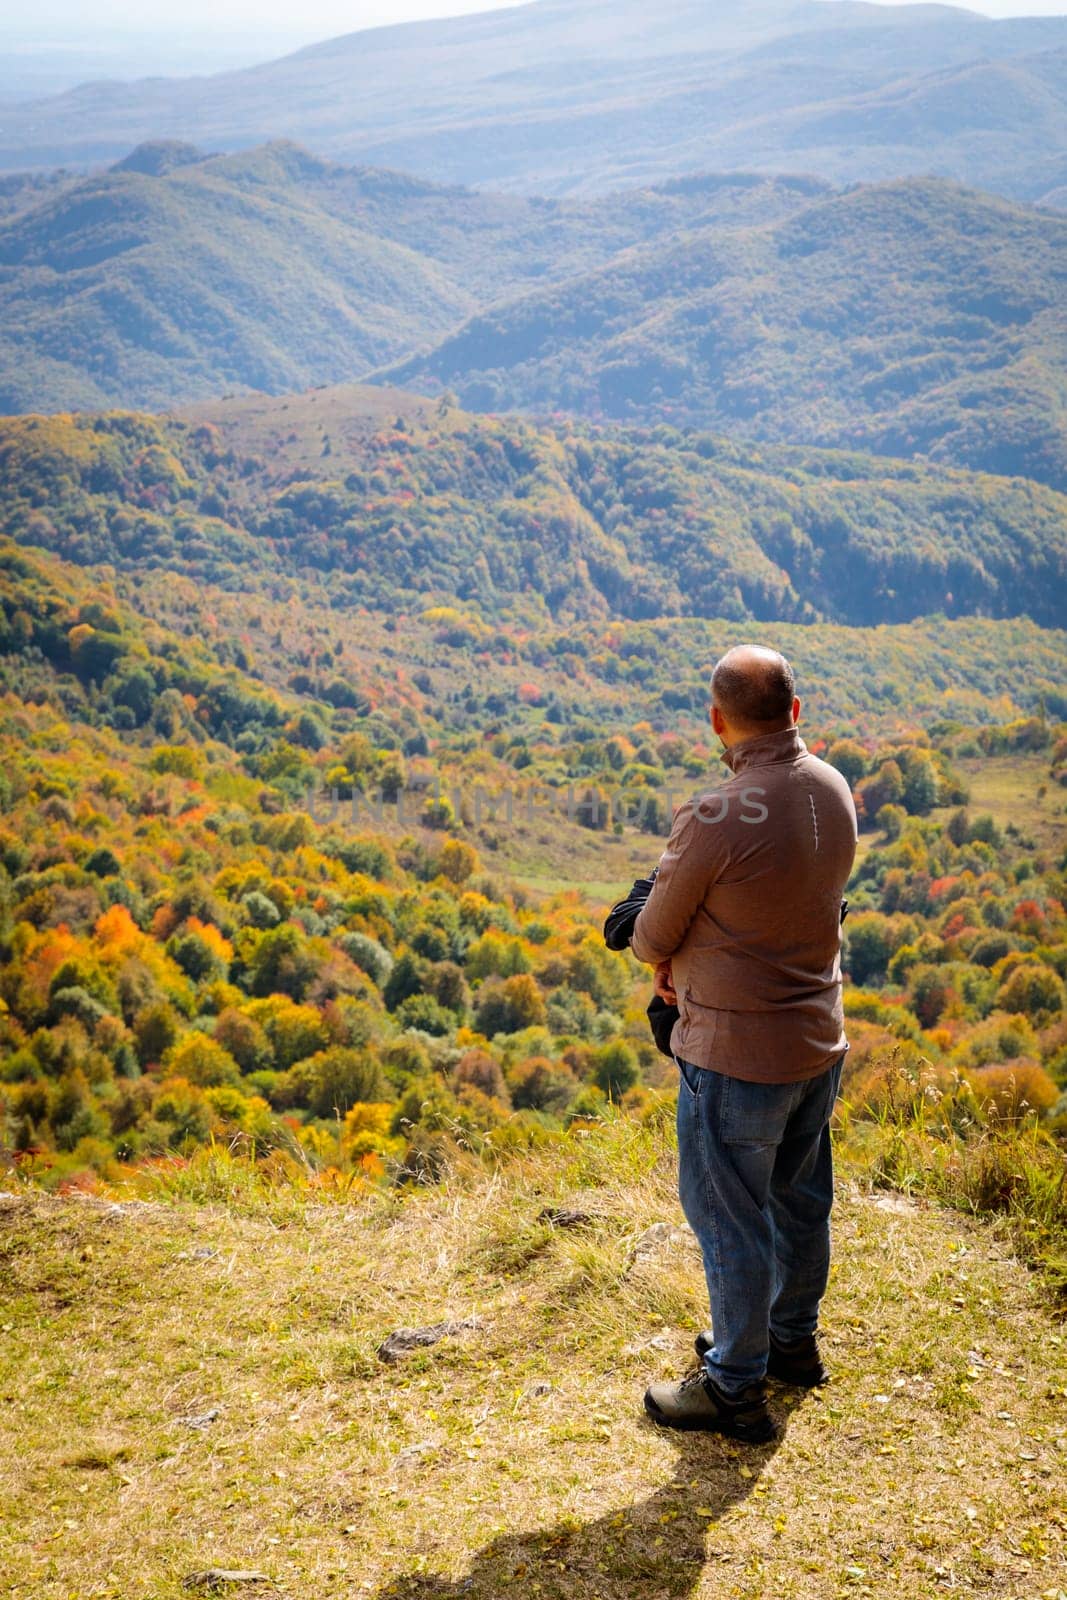 From a sacred peak overlook, a man takes in the tranquil mountain scenery, marveling at the breathtaking view. The serene ambiance and untouched natural beauty create a sense of wonder and inner calm.